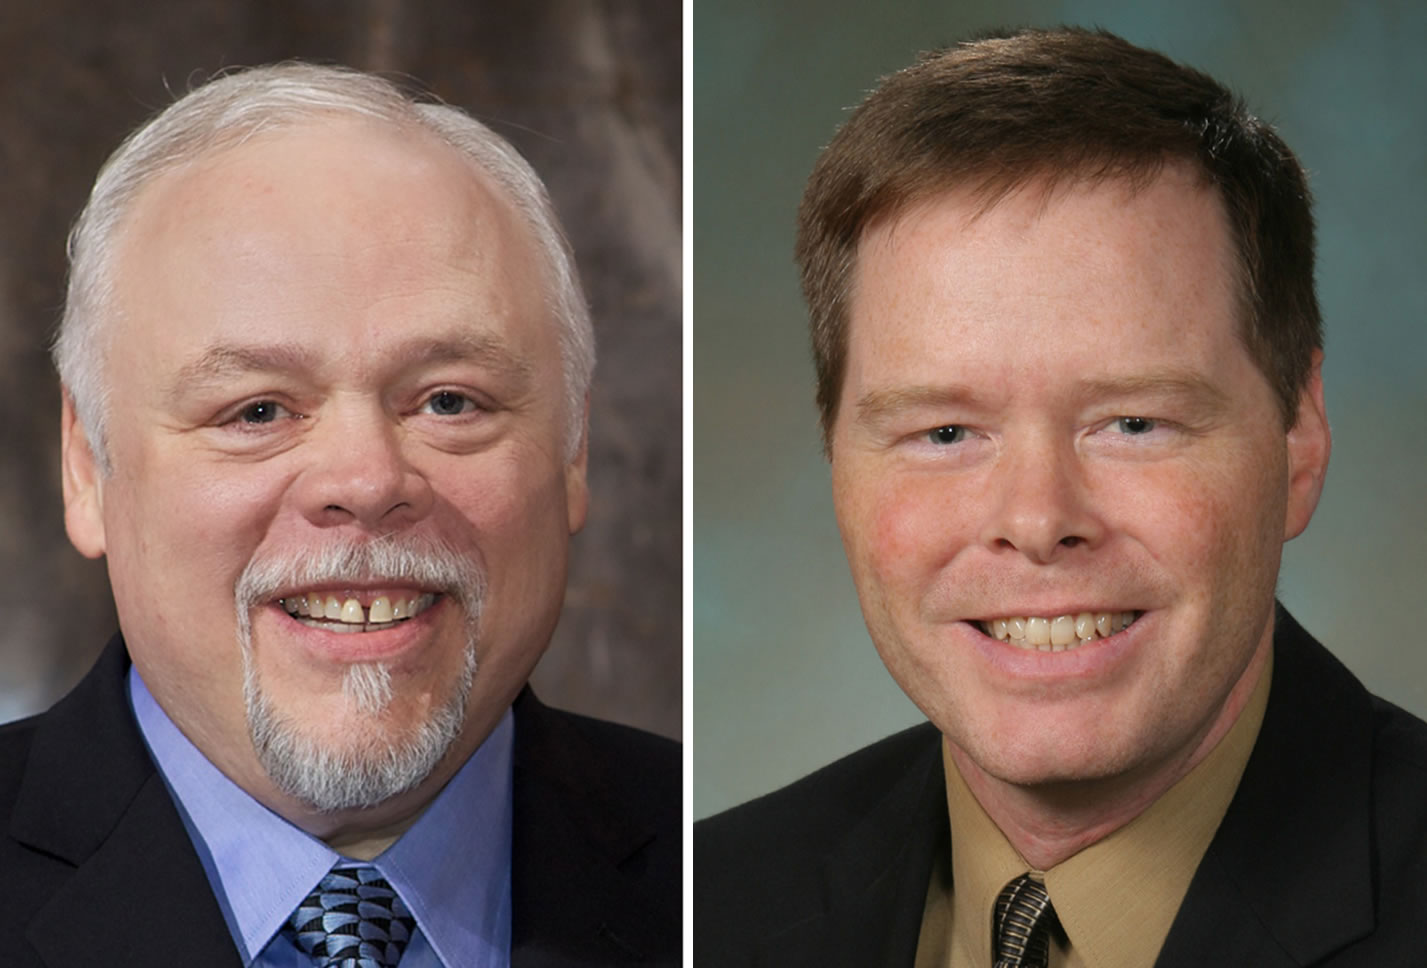 The 17th District state Senate race between incumbent Sen. Don Benton, R-Vancouver, and Rep. Tim Probst, D-Vancouver, resulted in a Benton victory on Wednesday, after Clark County election officials finished a hand recount.